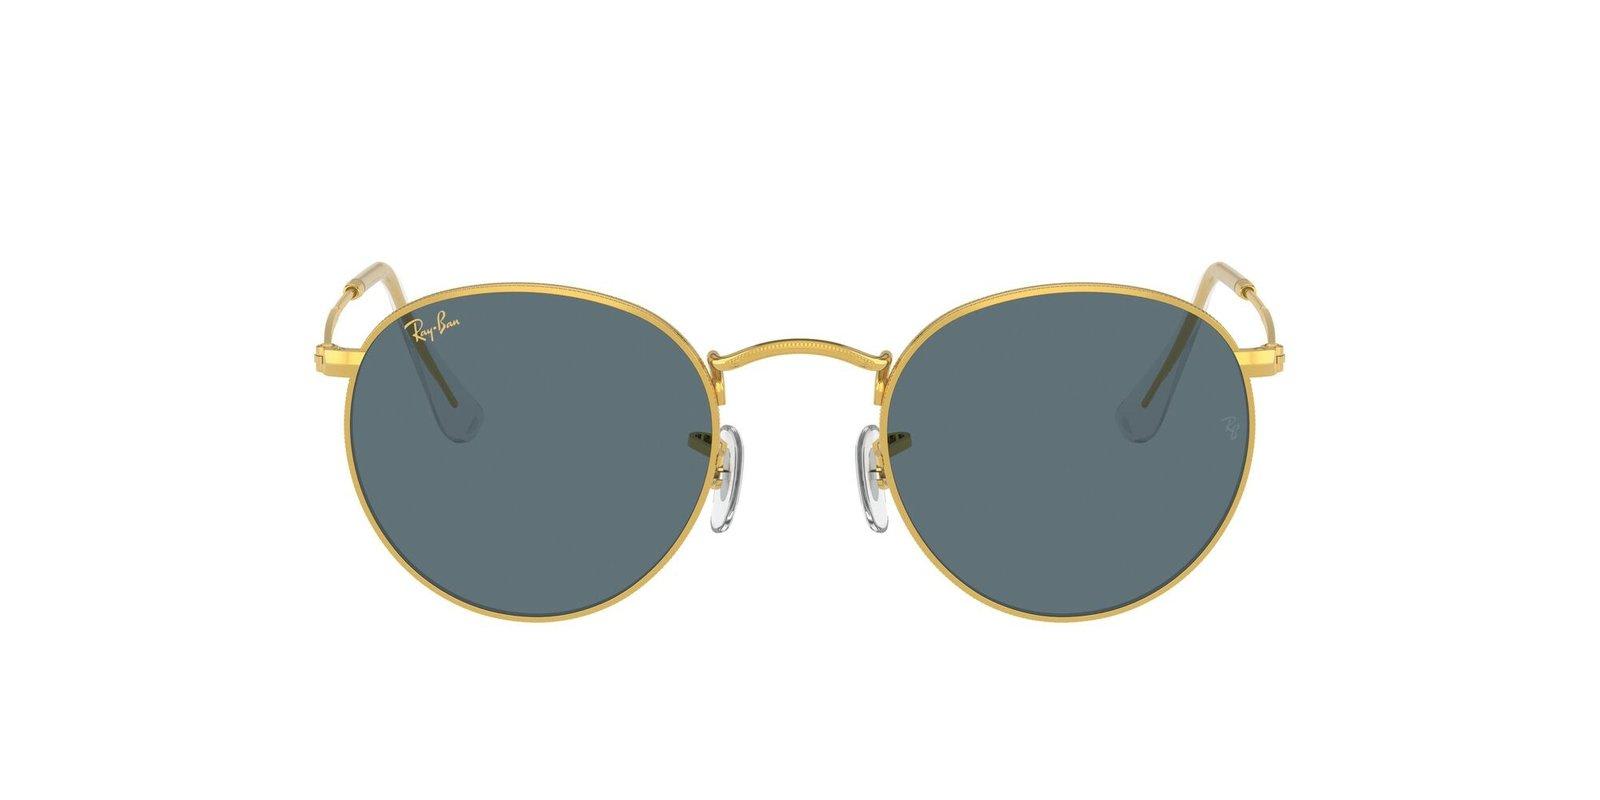 Ray Ban Round Frame Sunglasses In Gray